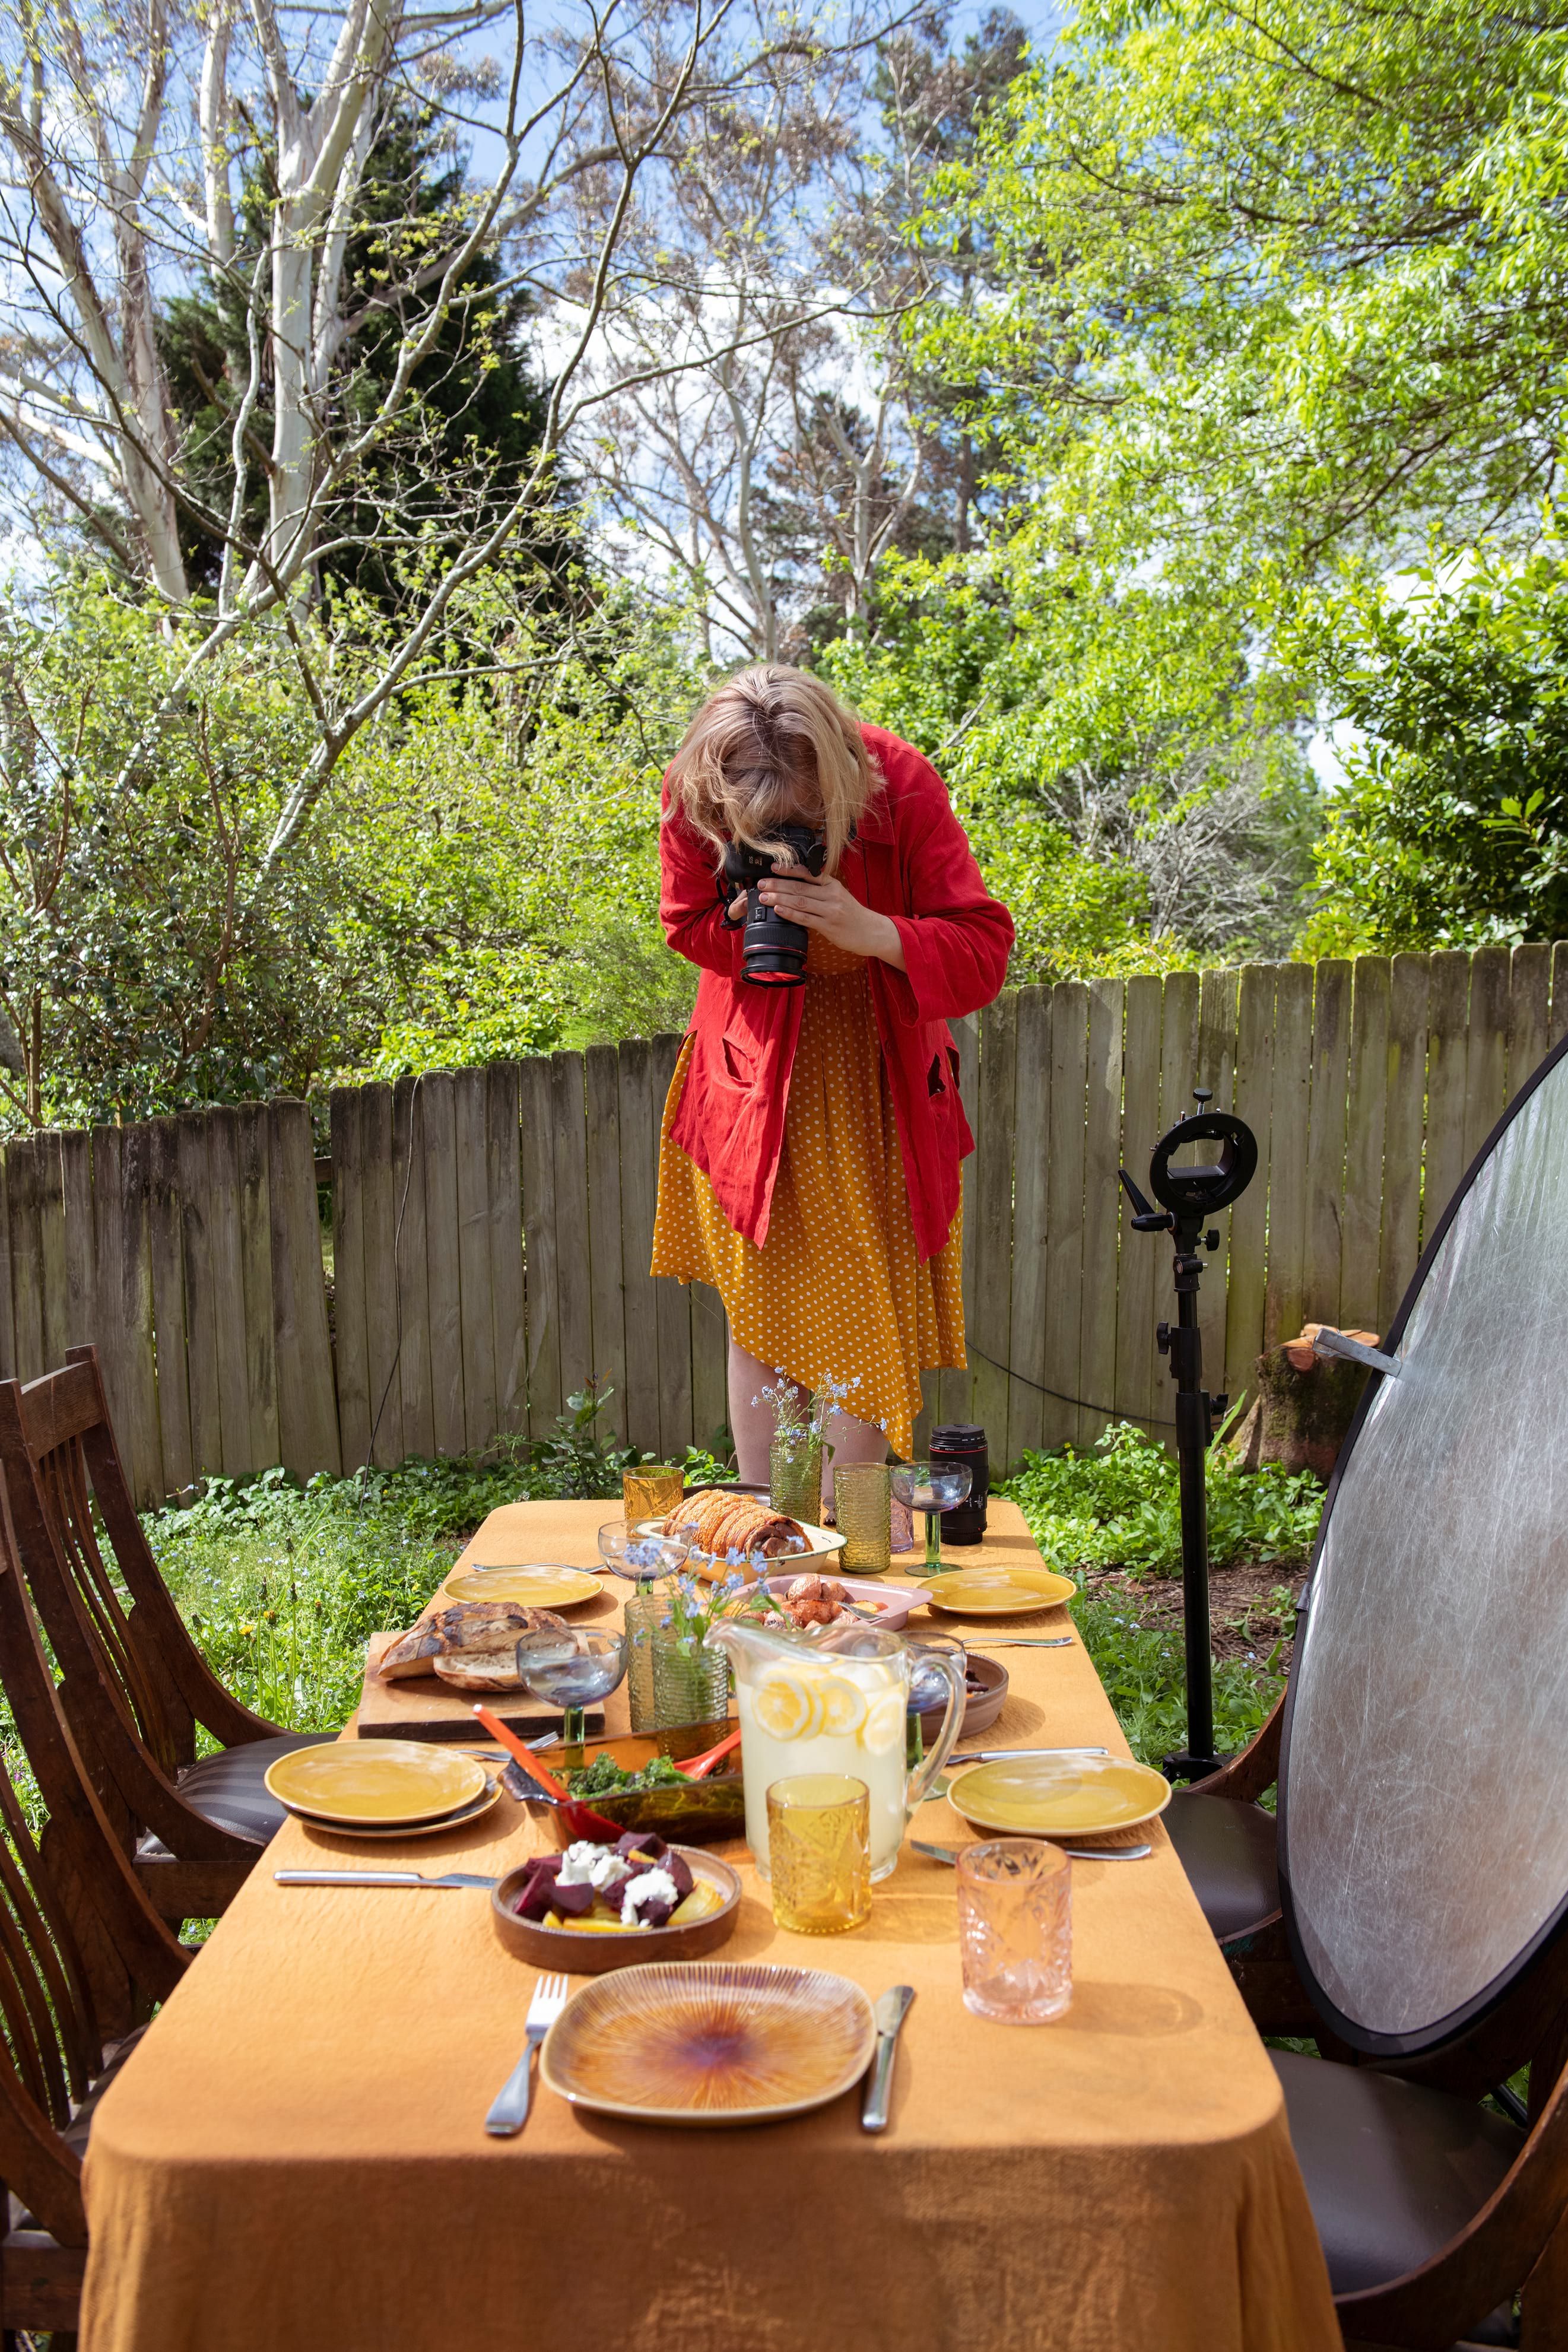 A woman takes a photograph of a table with food on it.